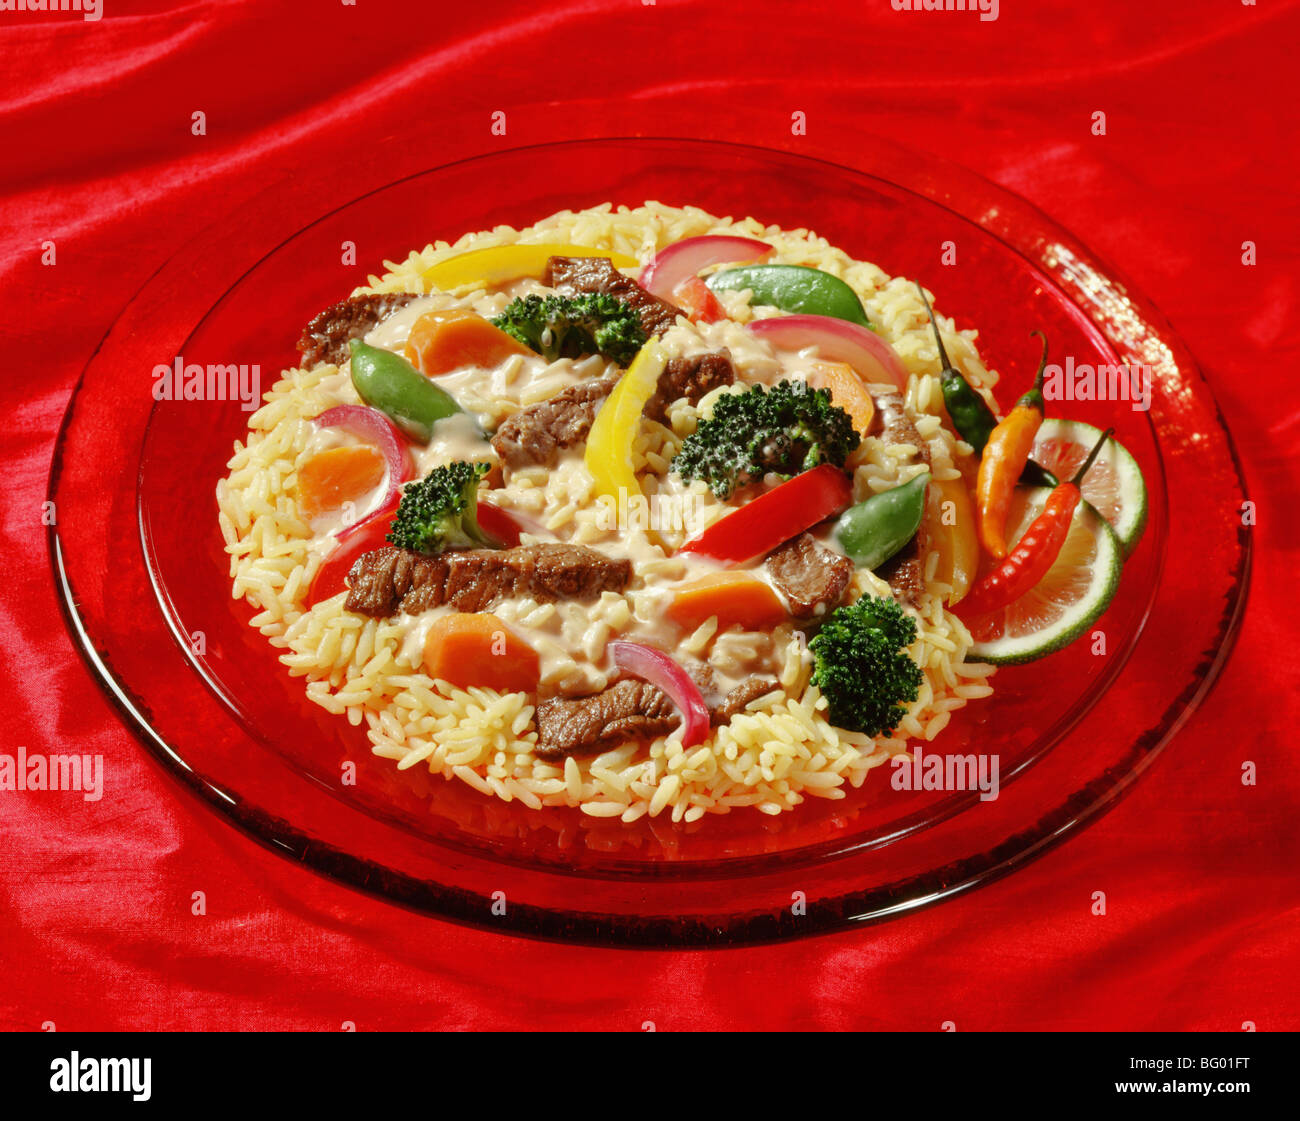 Carne tailandese curry stir fry sul riso Foto Stock